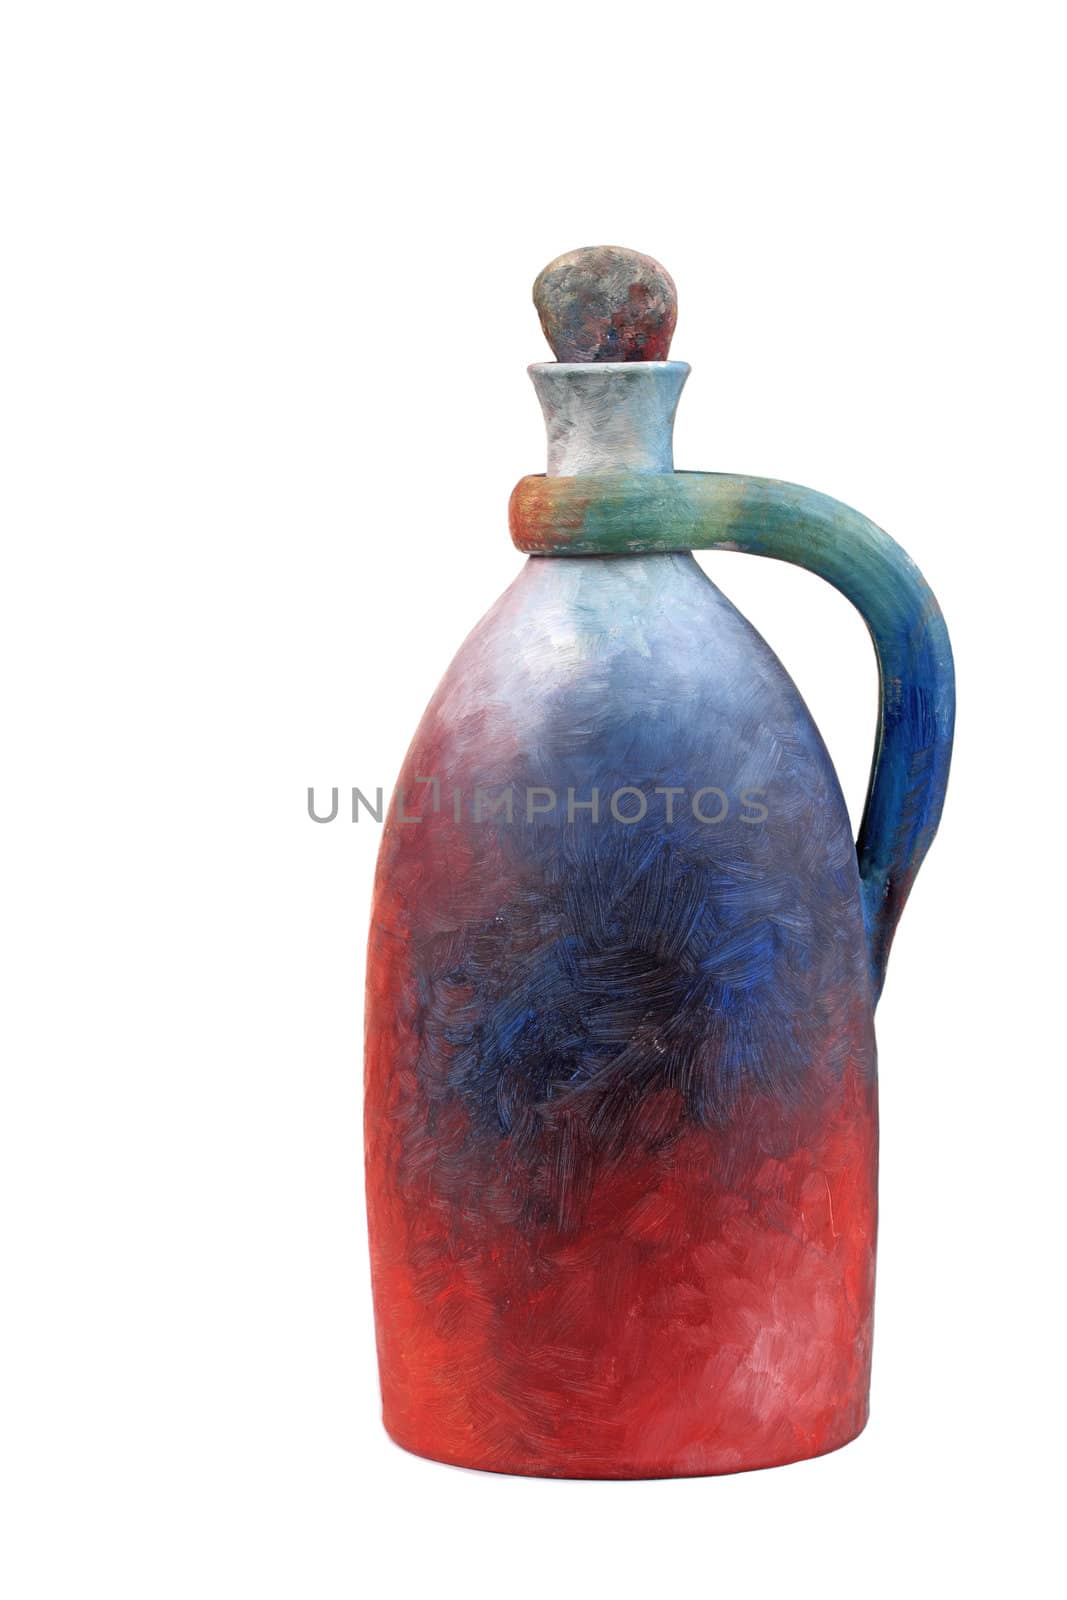 Hand painted jug against white background